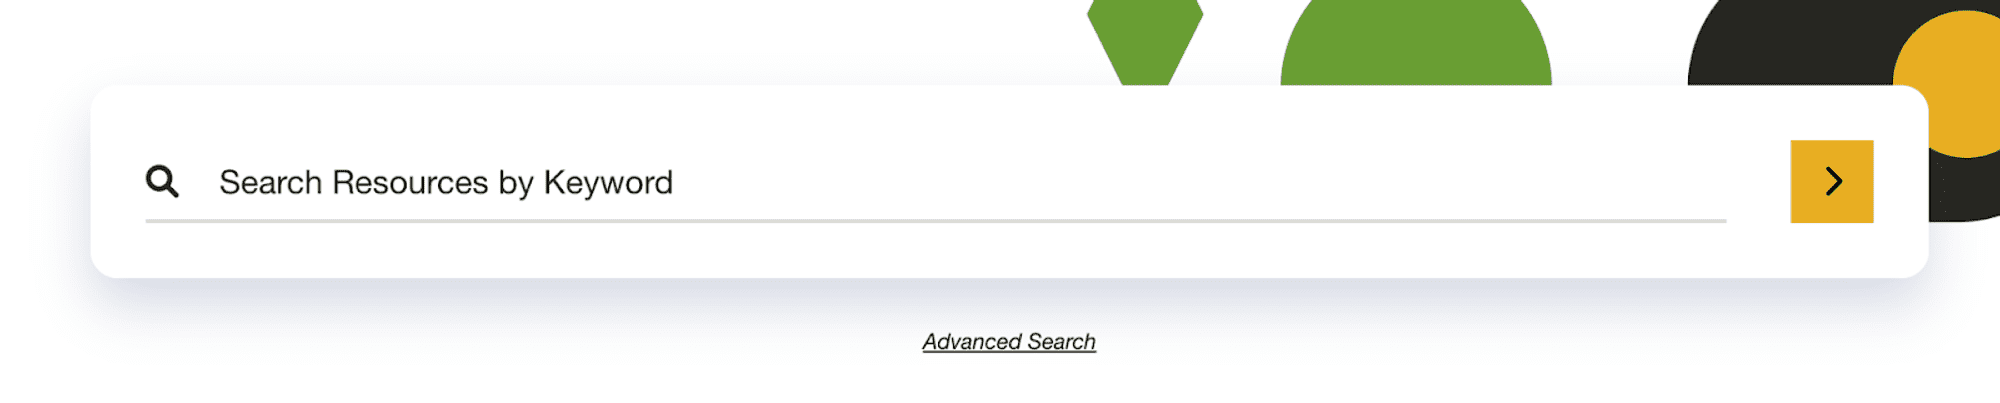 A search field with the text “Search Resources by Keyword” contained within the field.